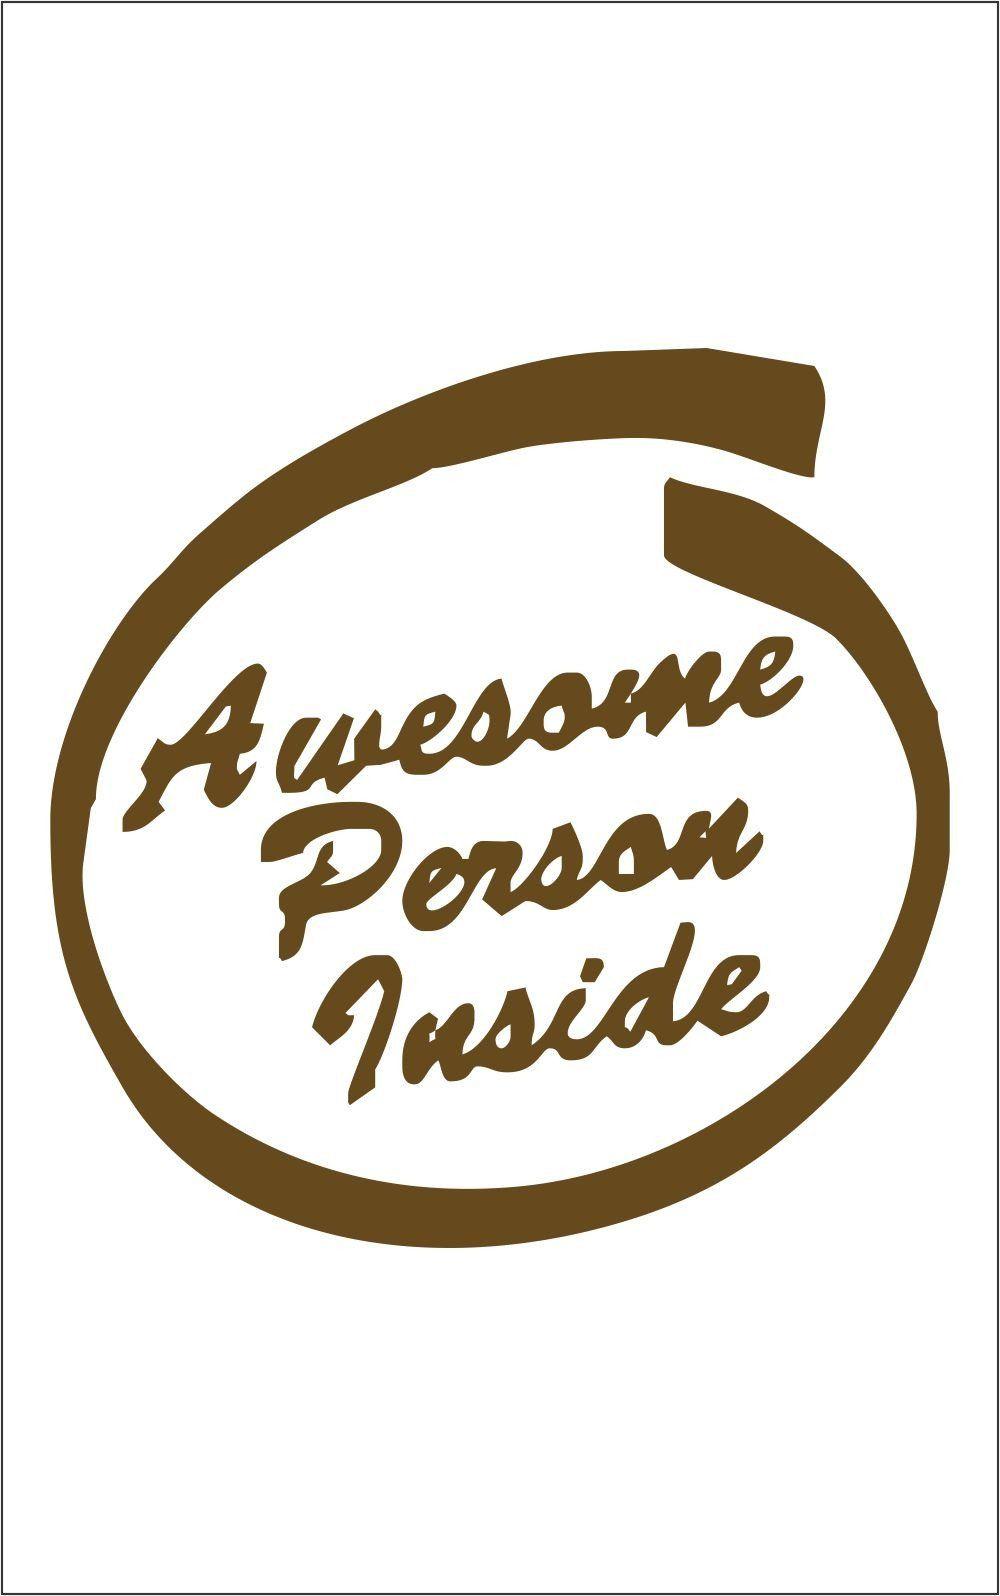 Awesome Person Logo - Awesome Person Inside T-Shirt for Women - T Bhai